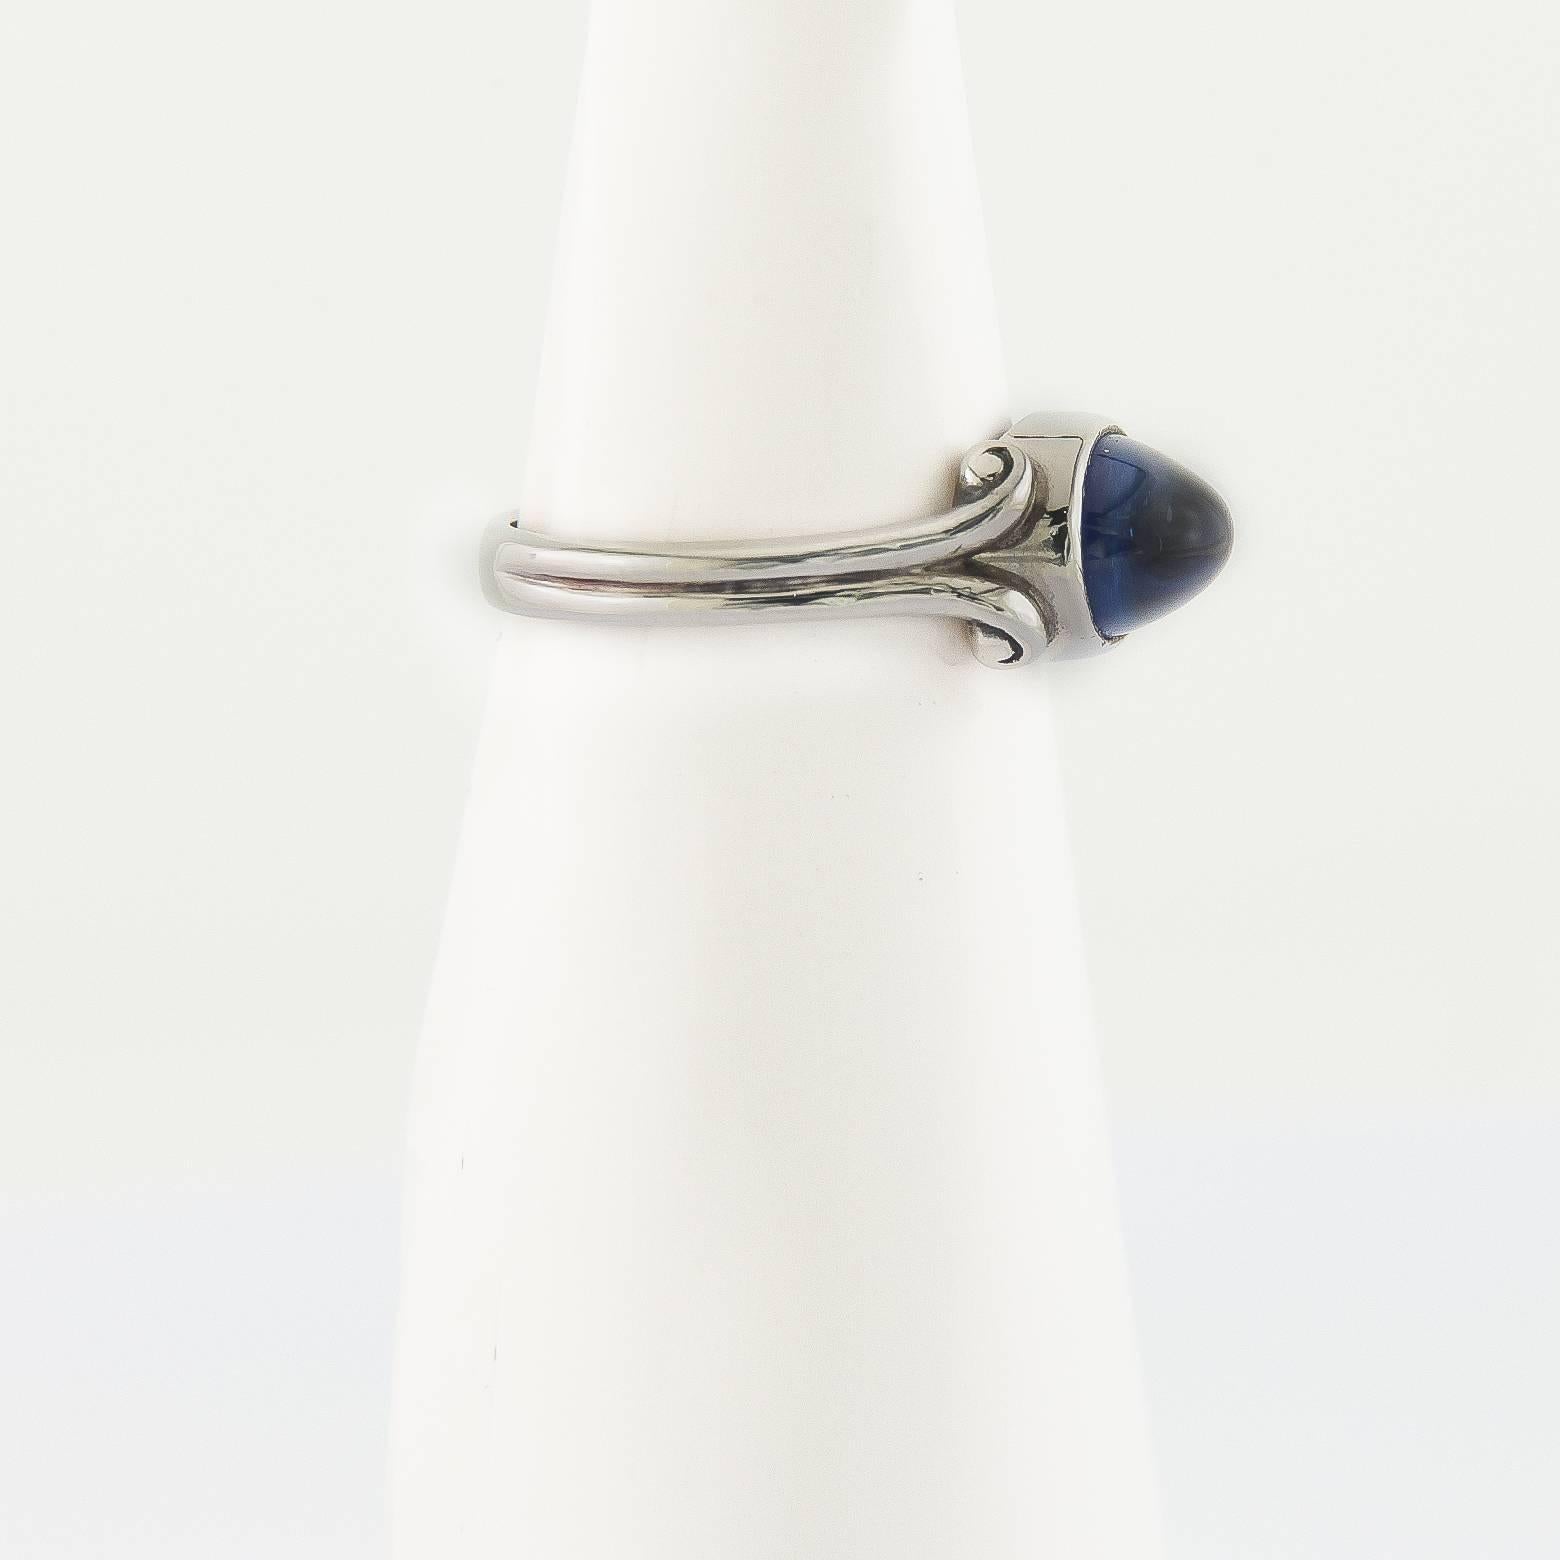 4 carats of paradise ocean blue sapphire against a platinum band accented with perfect swirls. This contemporary and classic ring has a hint of roman and grecian design,. Size 6.5 this ring can be sized up or down, Platinum is a pure precious metal.